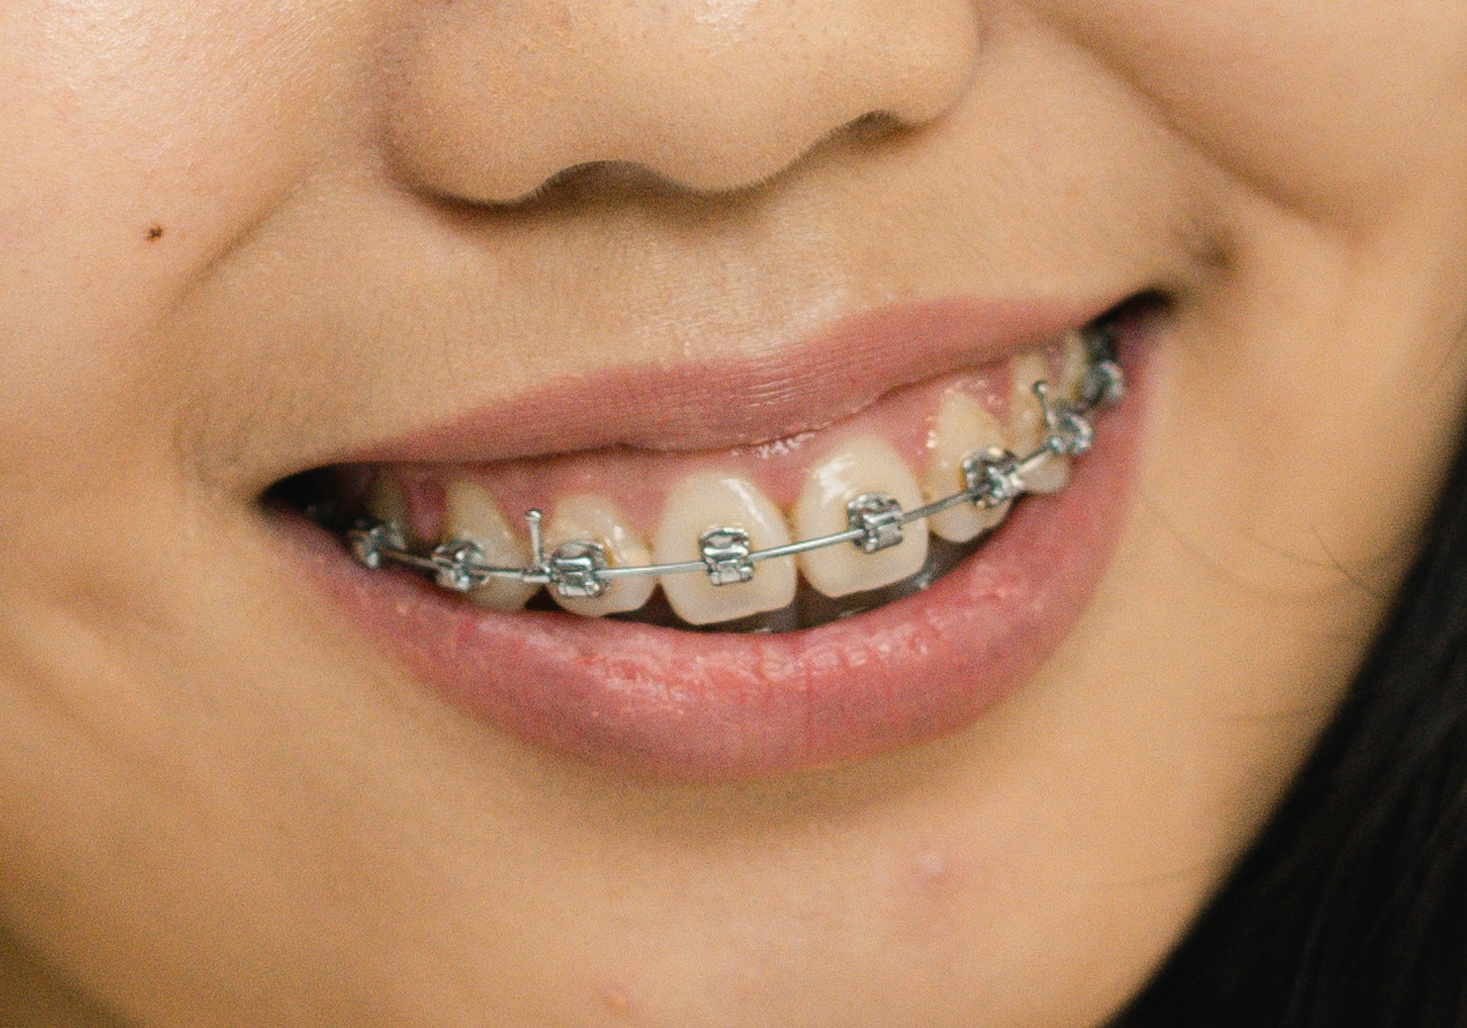 Metal Braces vs. Clear Braces: Which One is Right for You?